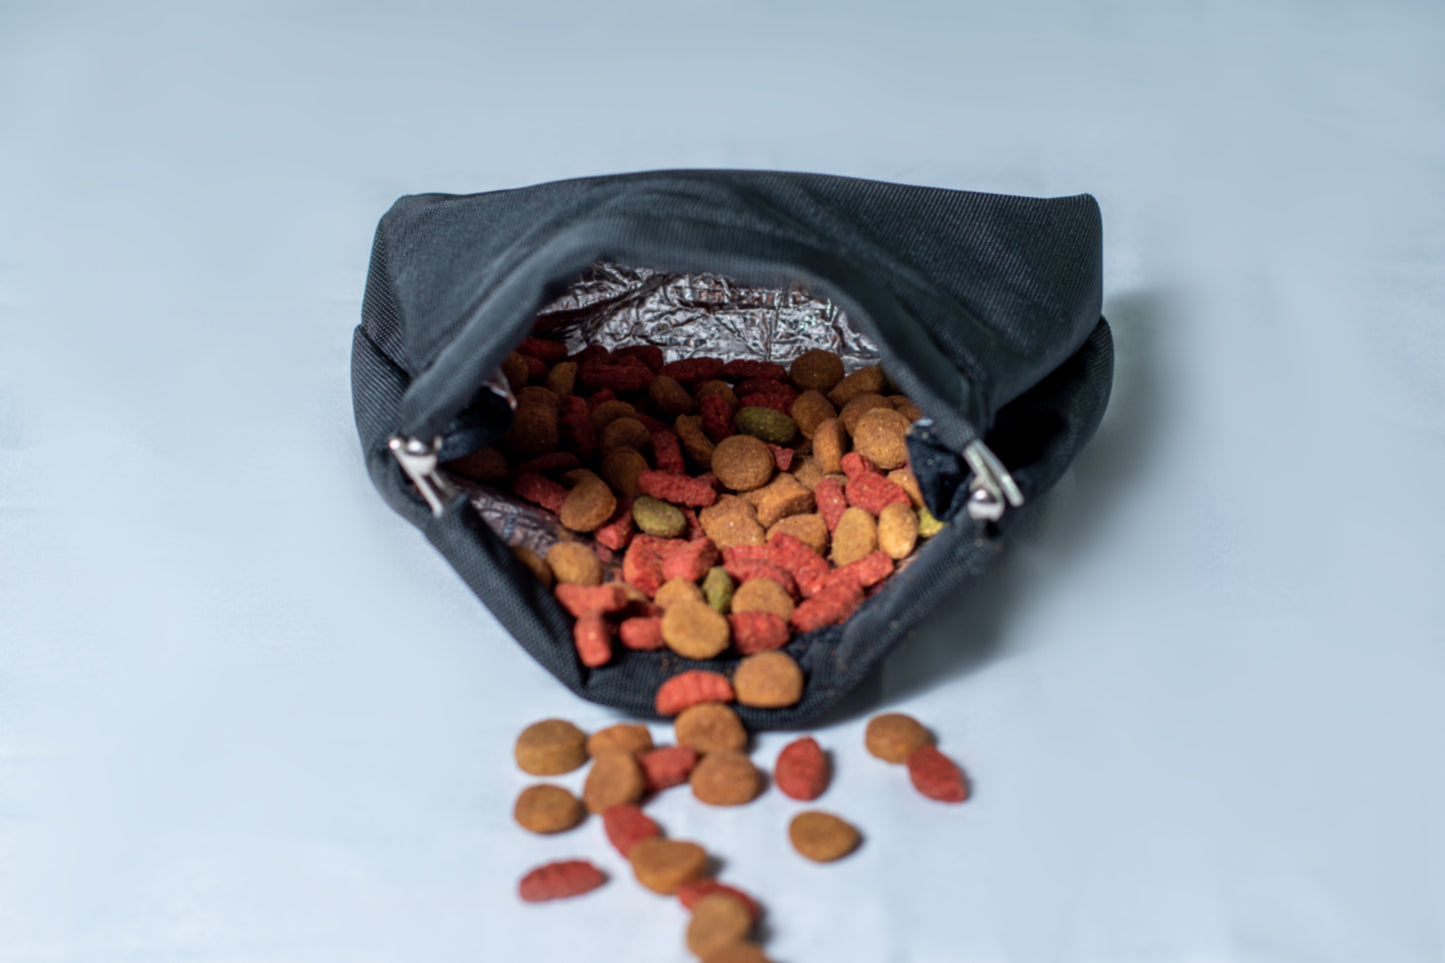 Insulated sleeve with metal closure thigh treat bag